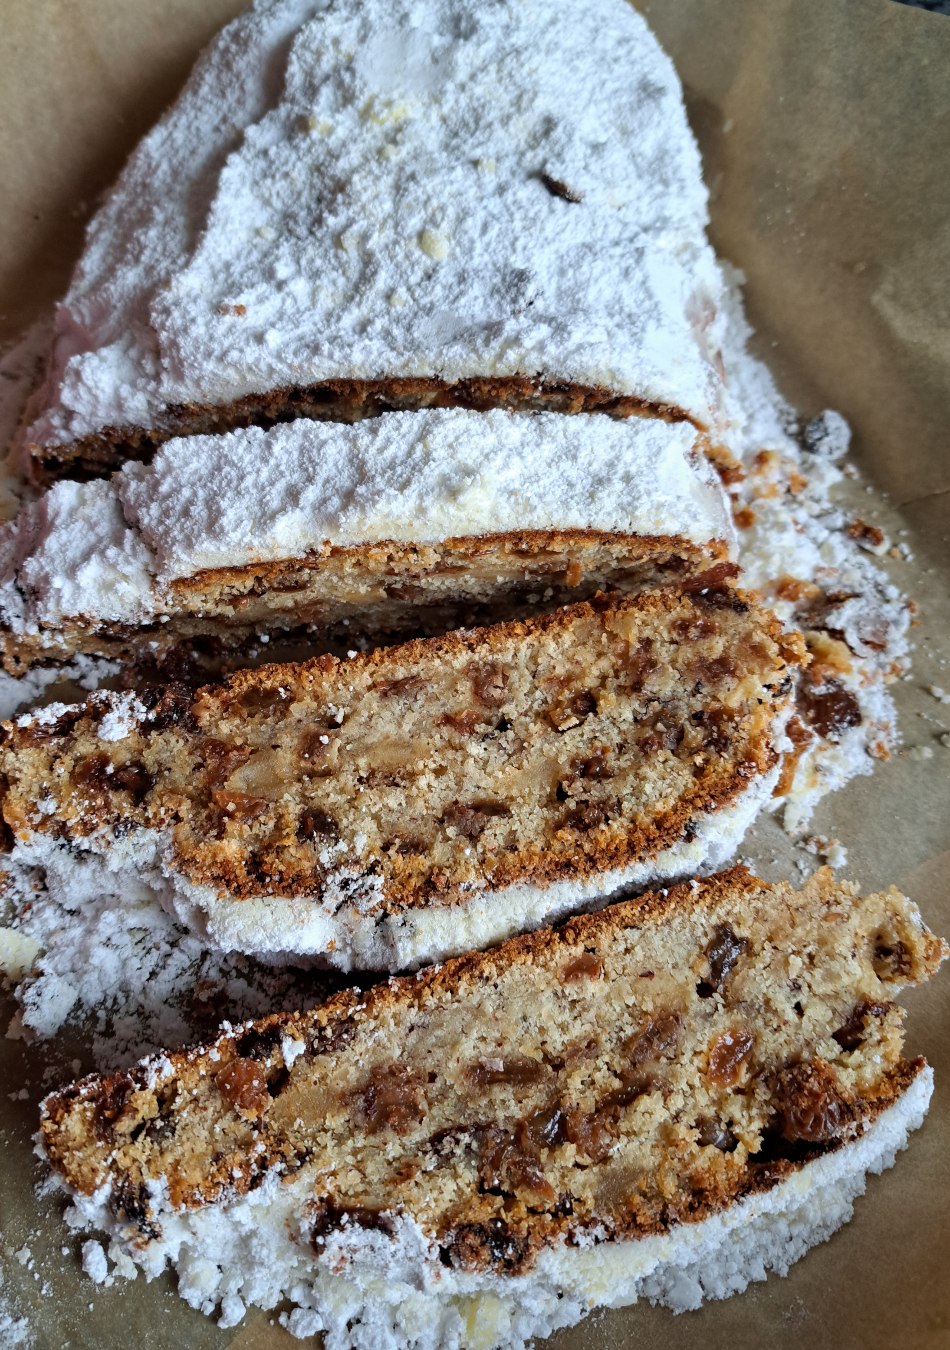 A beautifully presented German Stollen, generously dusted with powdered sugar, perfect for a festive Christmas treat.